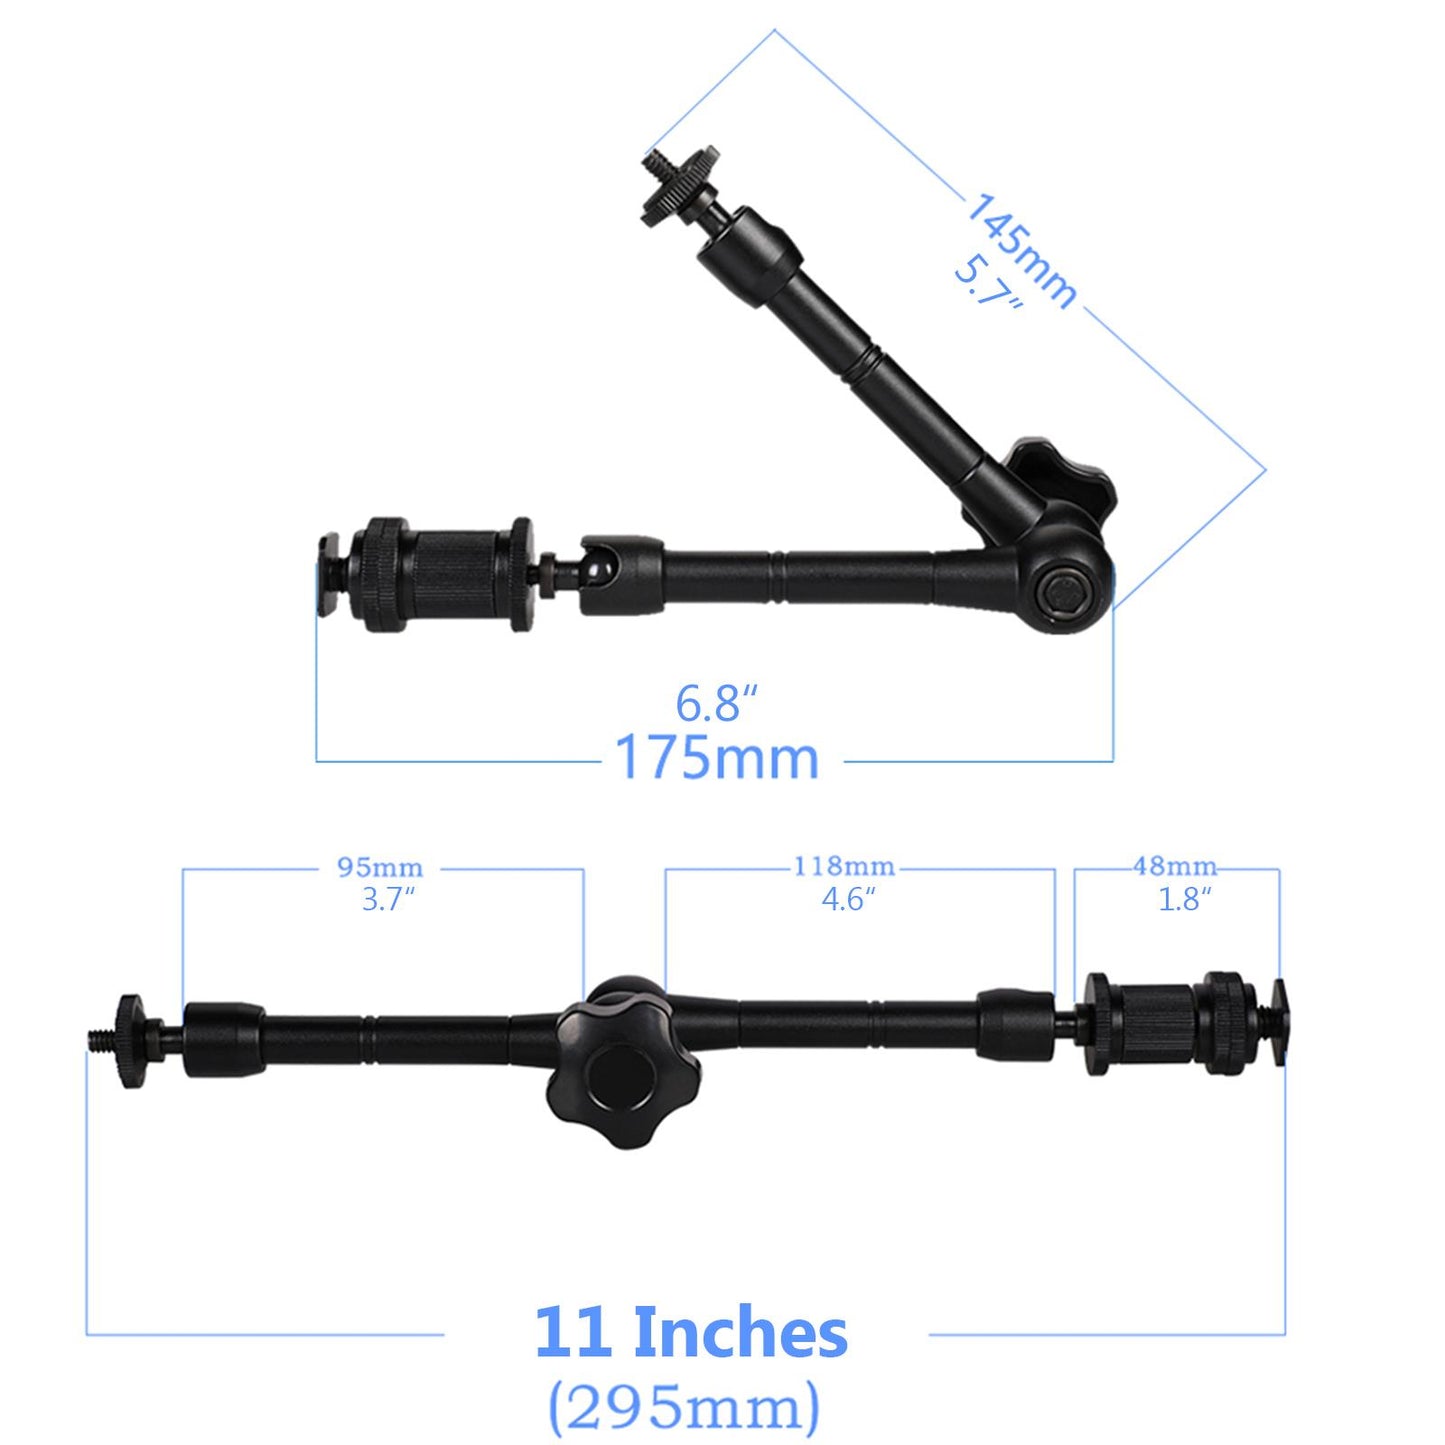 Articulating Friction Arm 11" with Large Super Crab Clamp and Hot Shoe Mount 1/4" Magic DSLR Tripod Arms Kit for Photography, Video, Camera Rig, LED Light, Flash Light, LCD Monitor